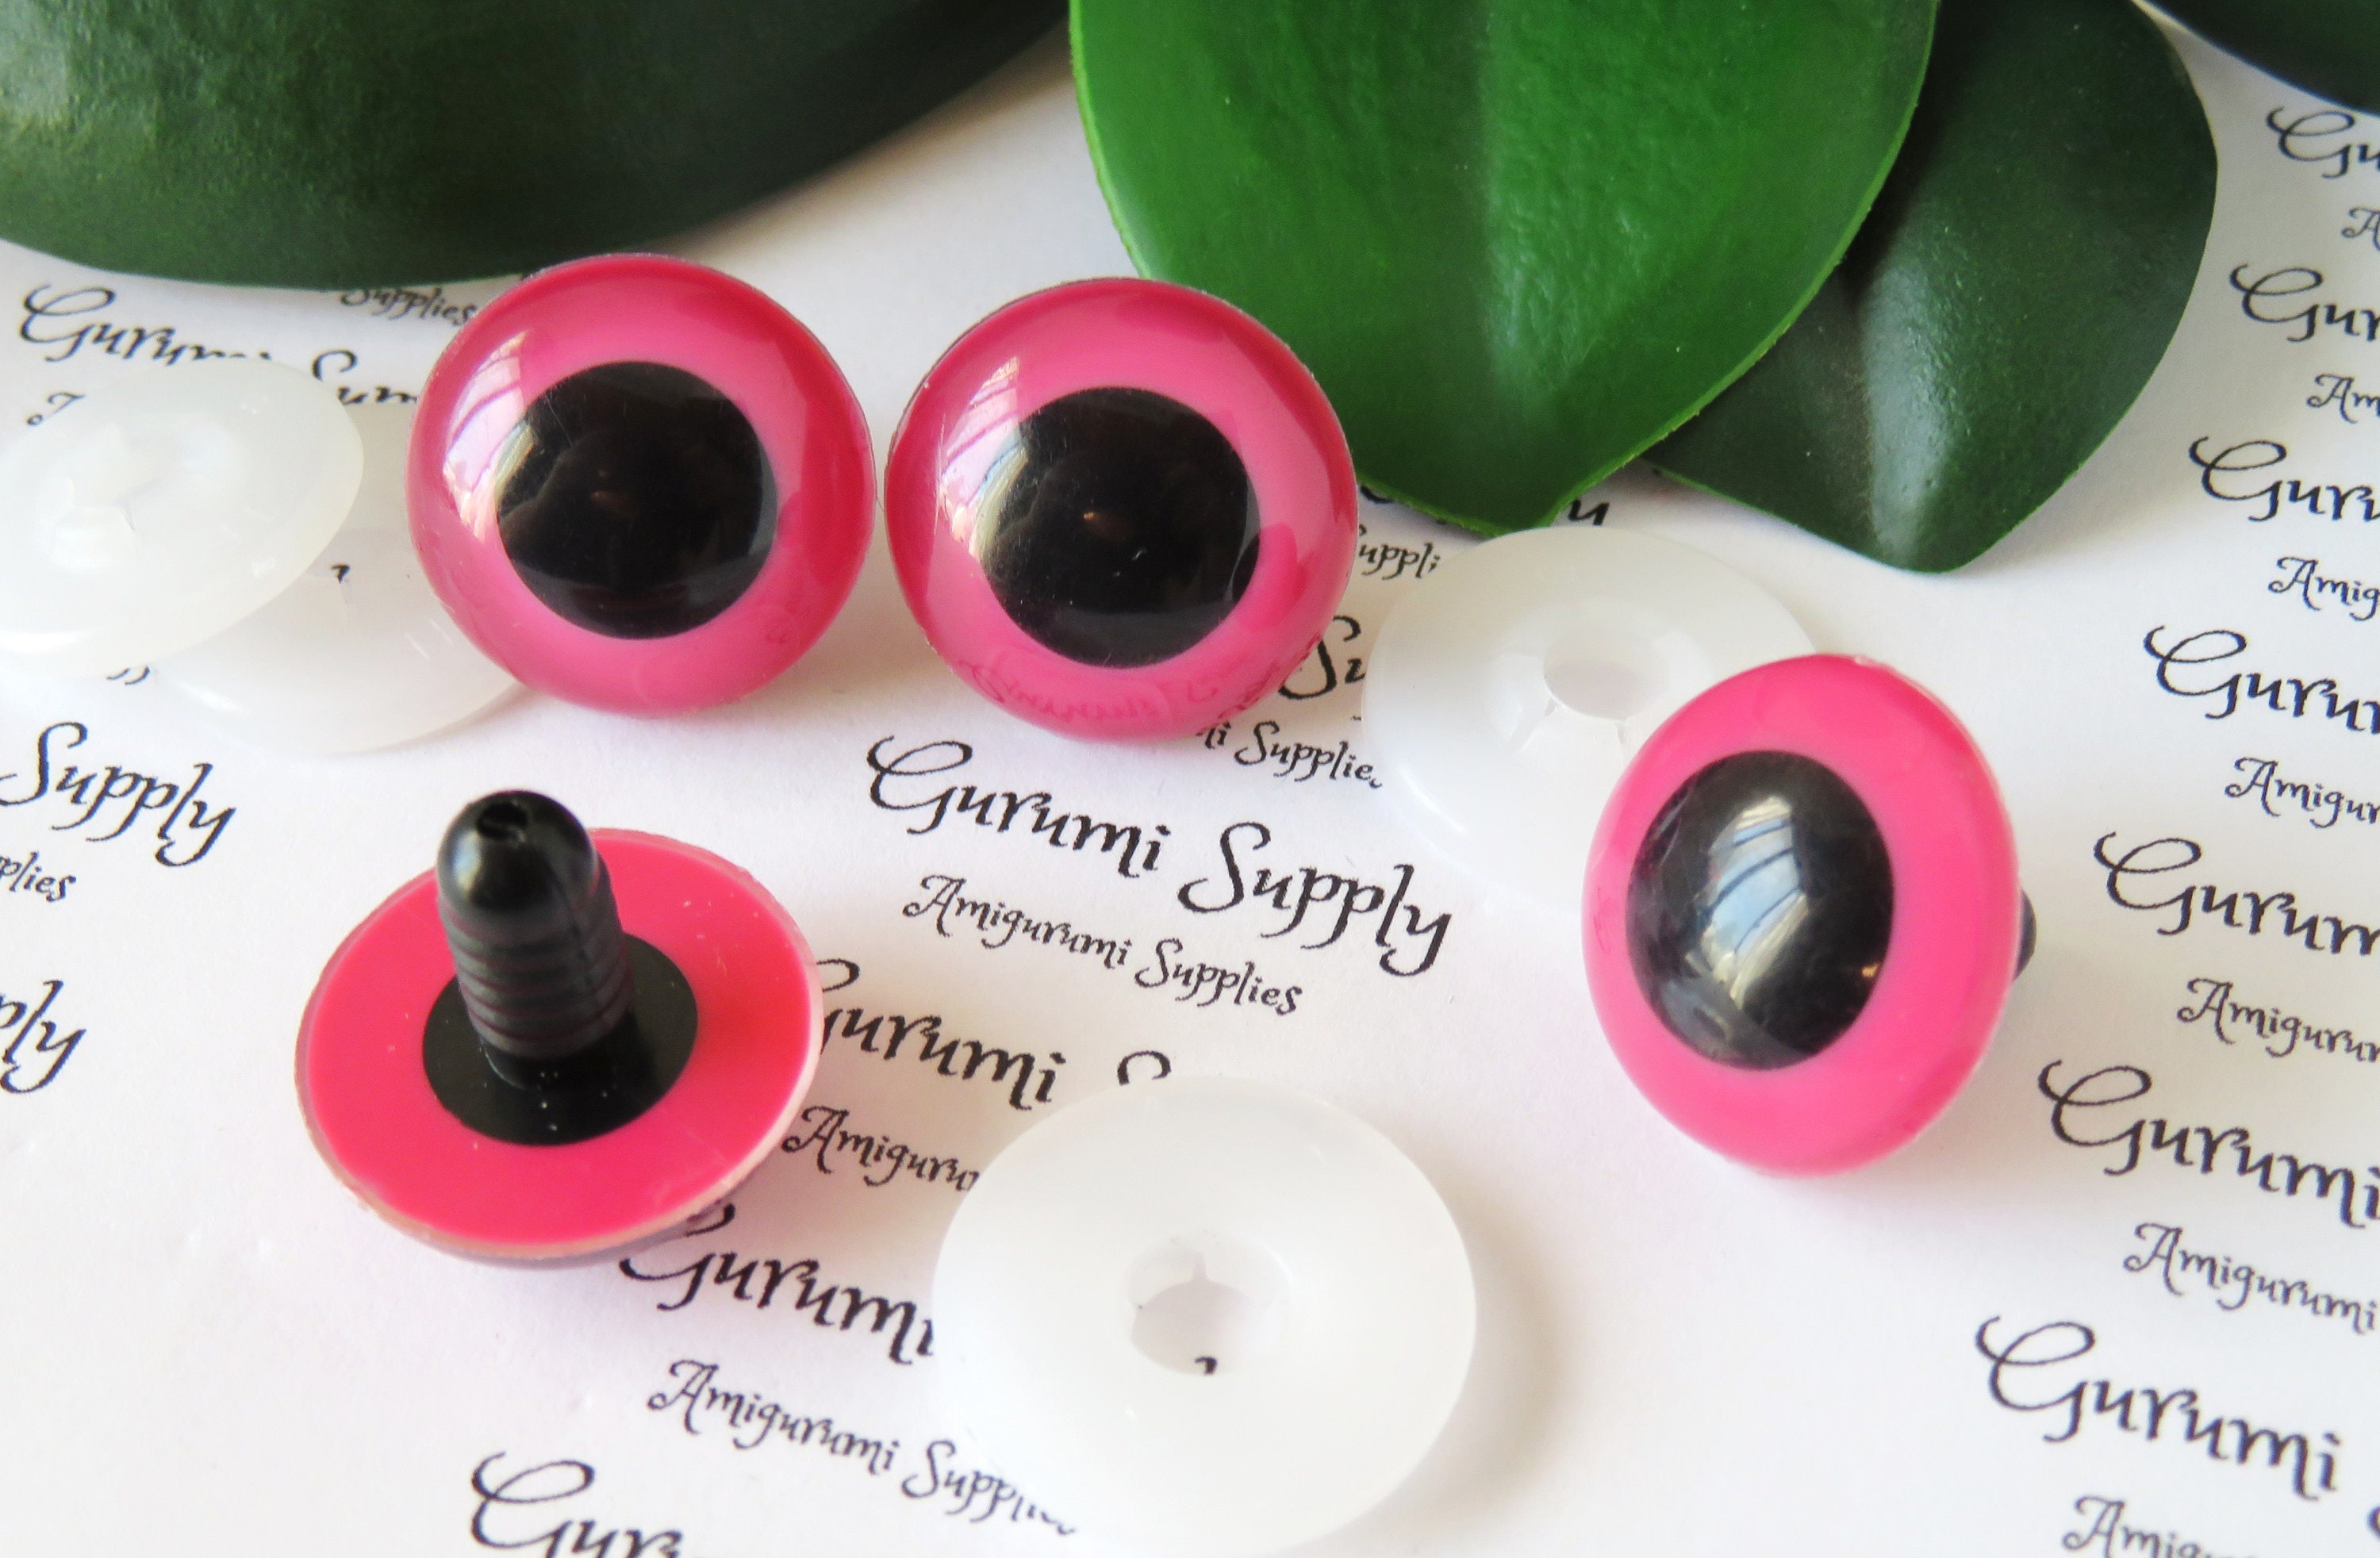 20mm Amber Iris Black Pupils Round Safety Eyes and Washers: 2 Count/1 Pair  – Paint Free - Dolls/ Amigurumi/ Animals/ Stuffed Creations